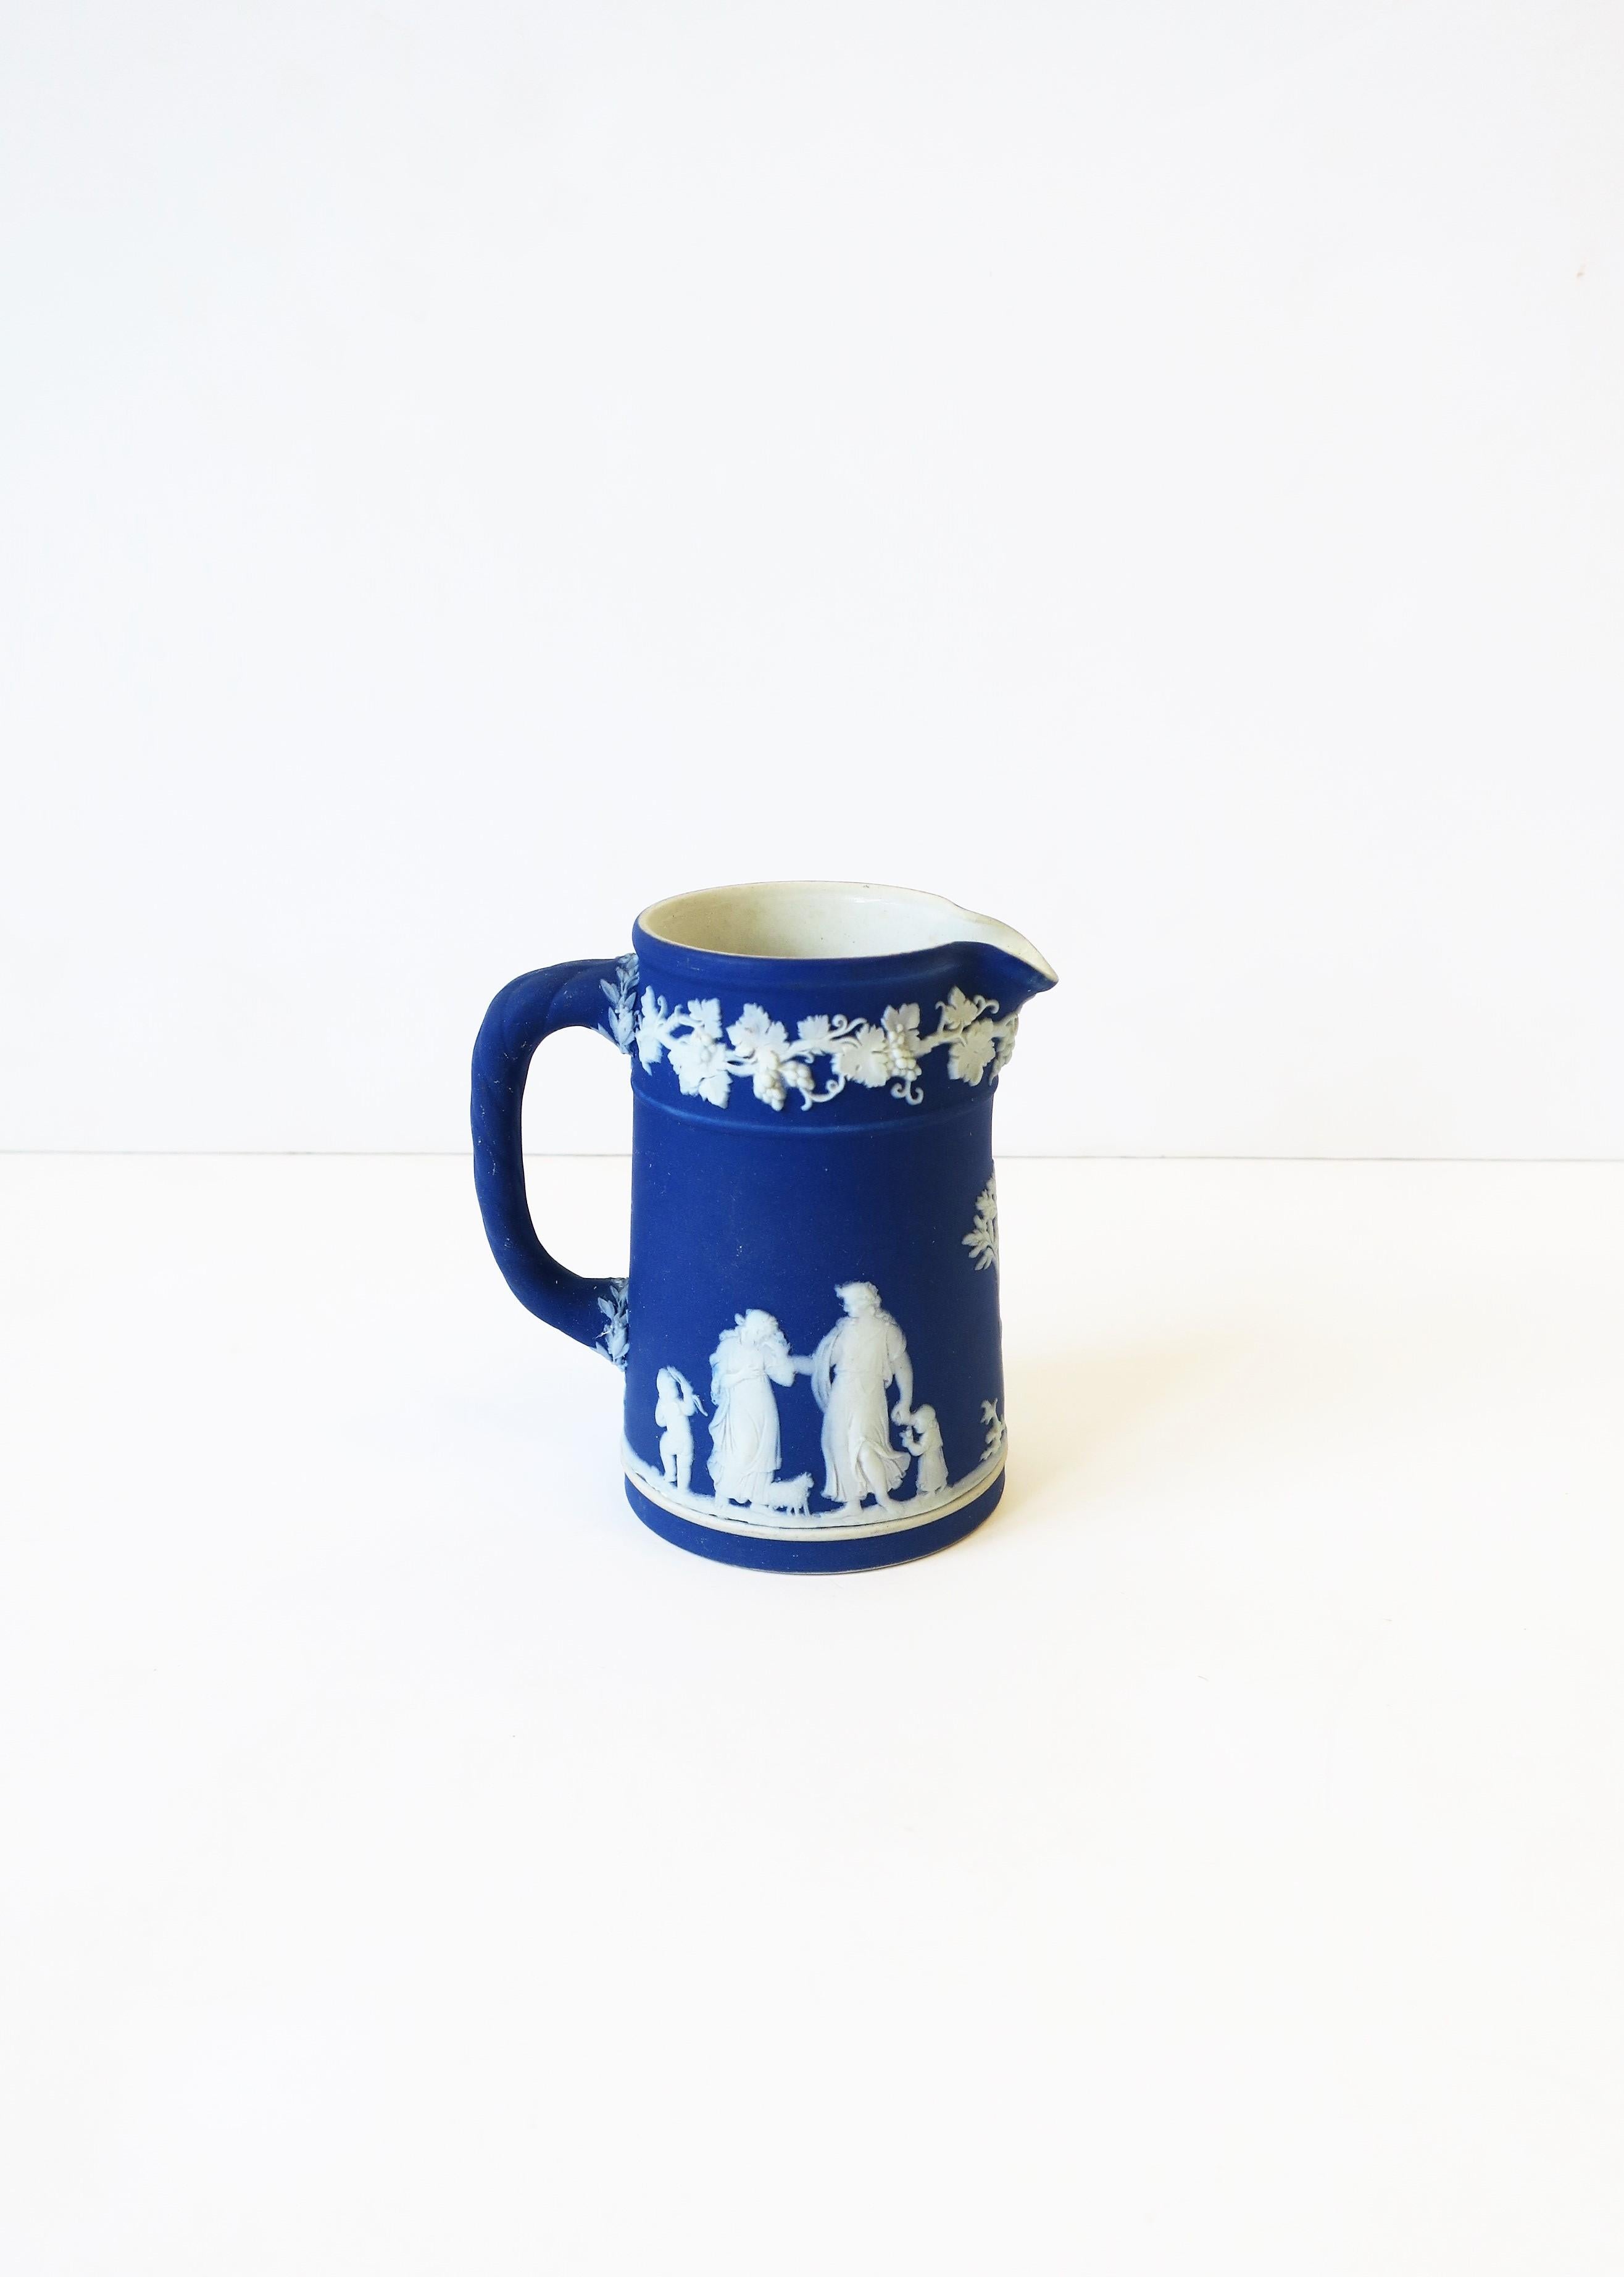 20th Century Wedgwood Jasperware Antique English Blue and White Pitcher Neoclassical